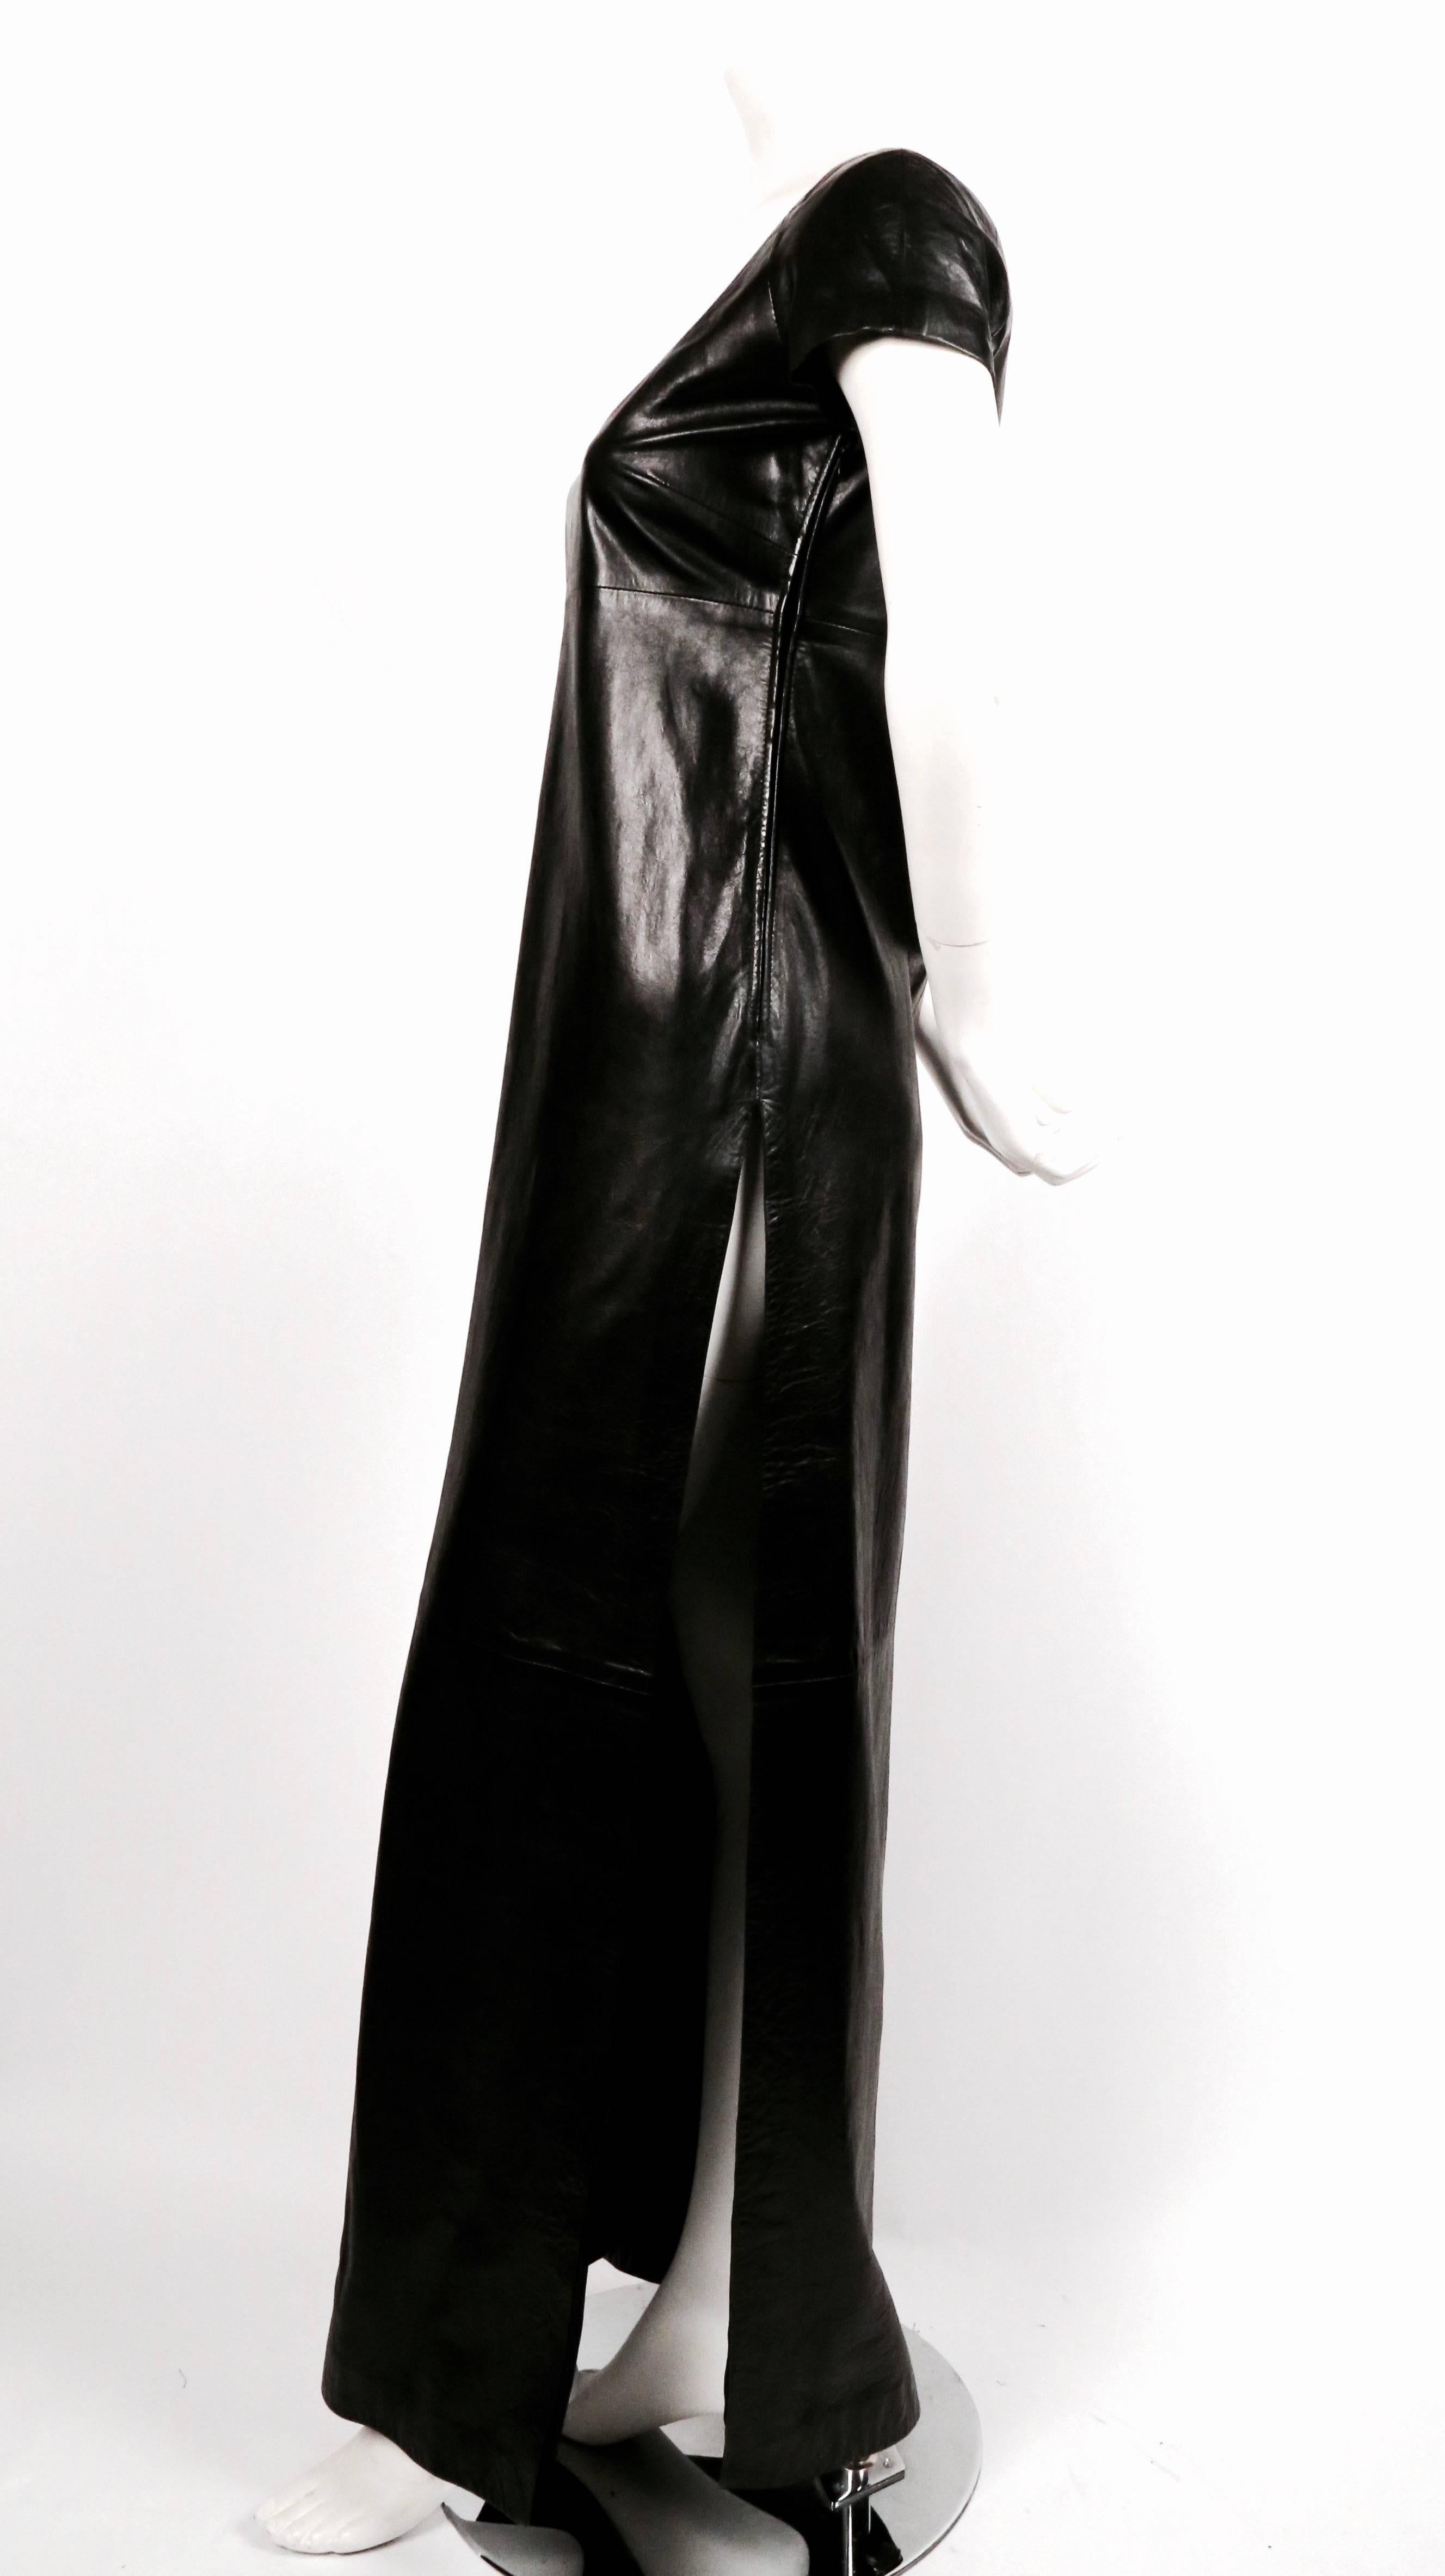 Very rare jet black lambskin leather dress with very high side slit from Tom Ford for Gucci dating to the late 1990's. Labeled an Italian size 42. Fits a size 2 or 4. Approximate measurements; bust 34", waist 34", hips 35" and length